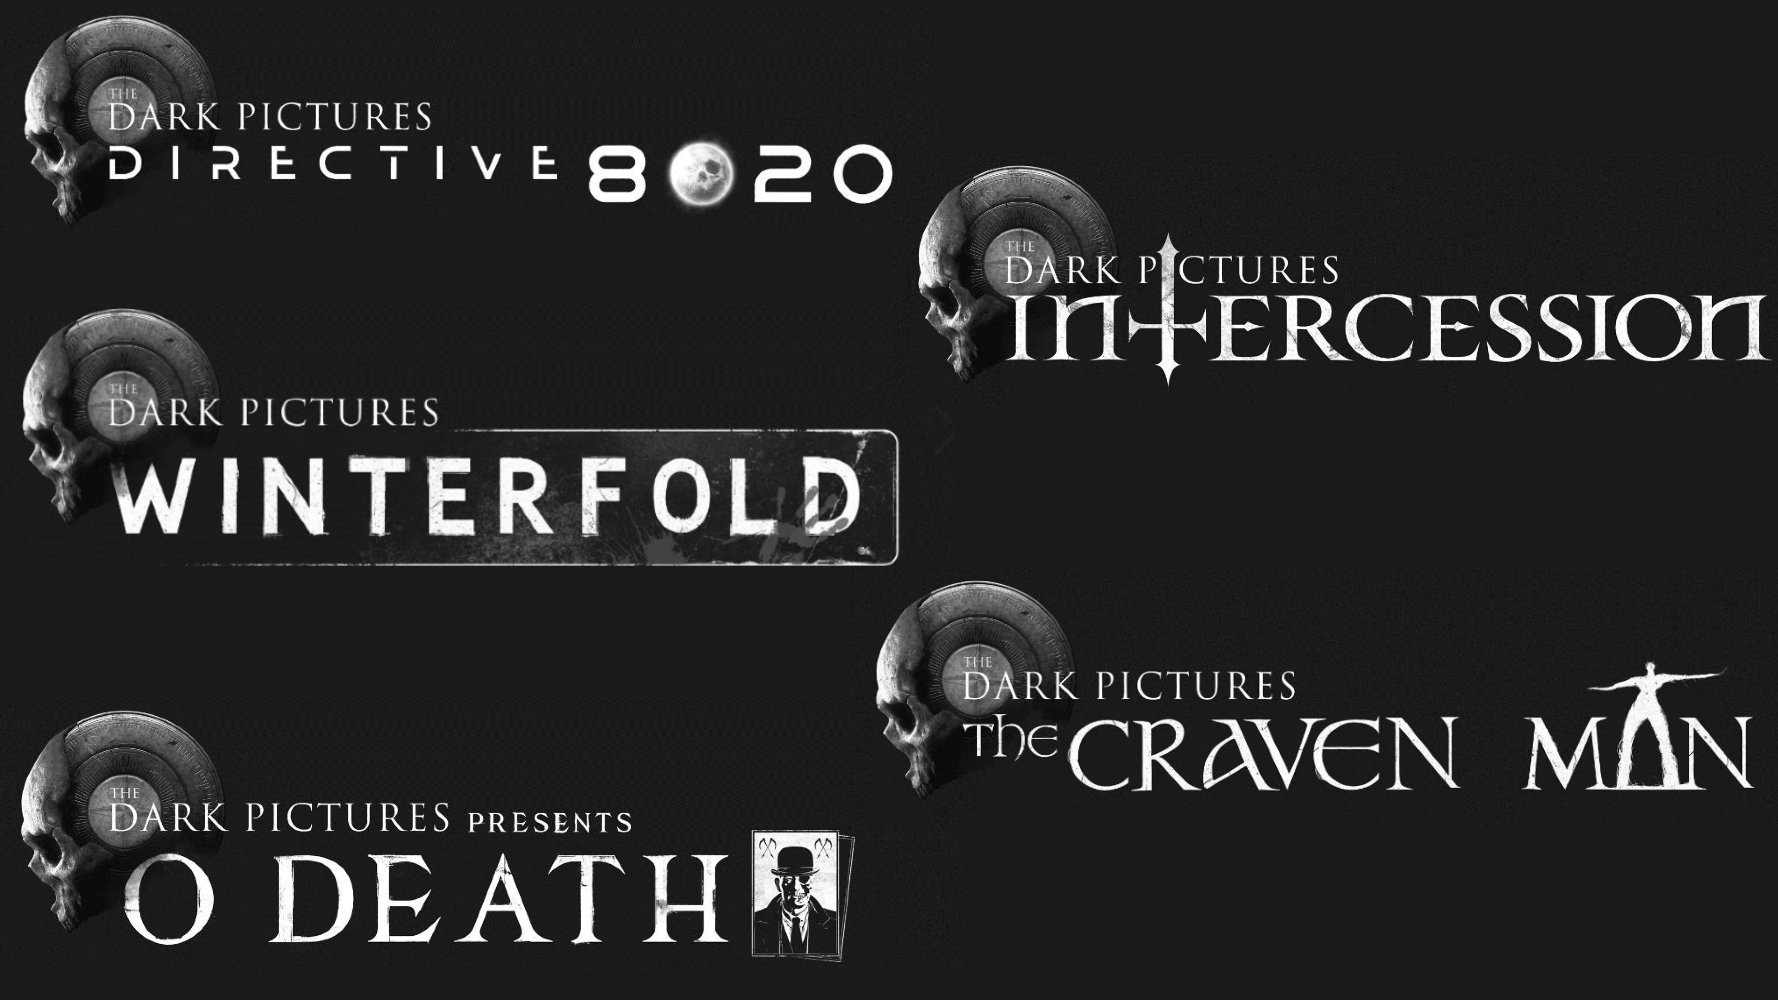 Here are the Upcoming Dark Pictures Anthology Games